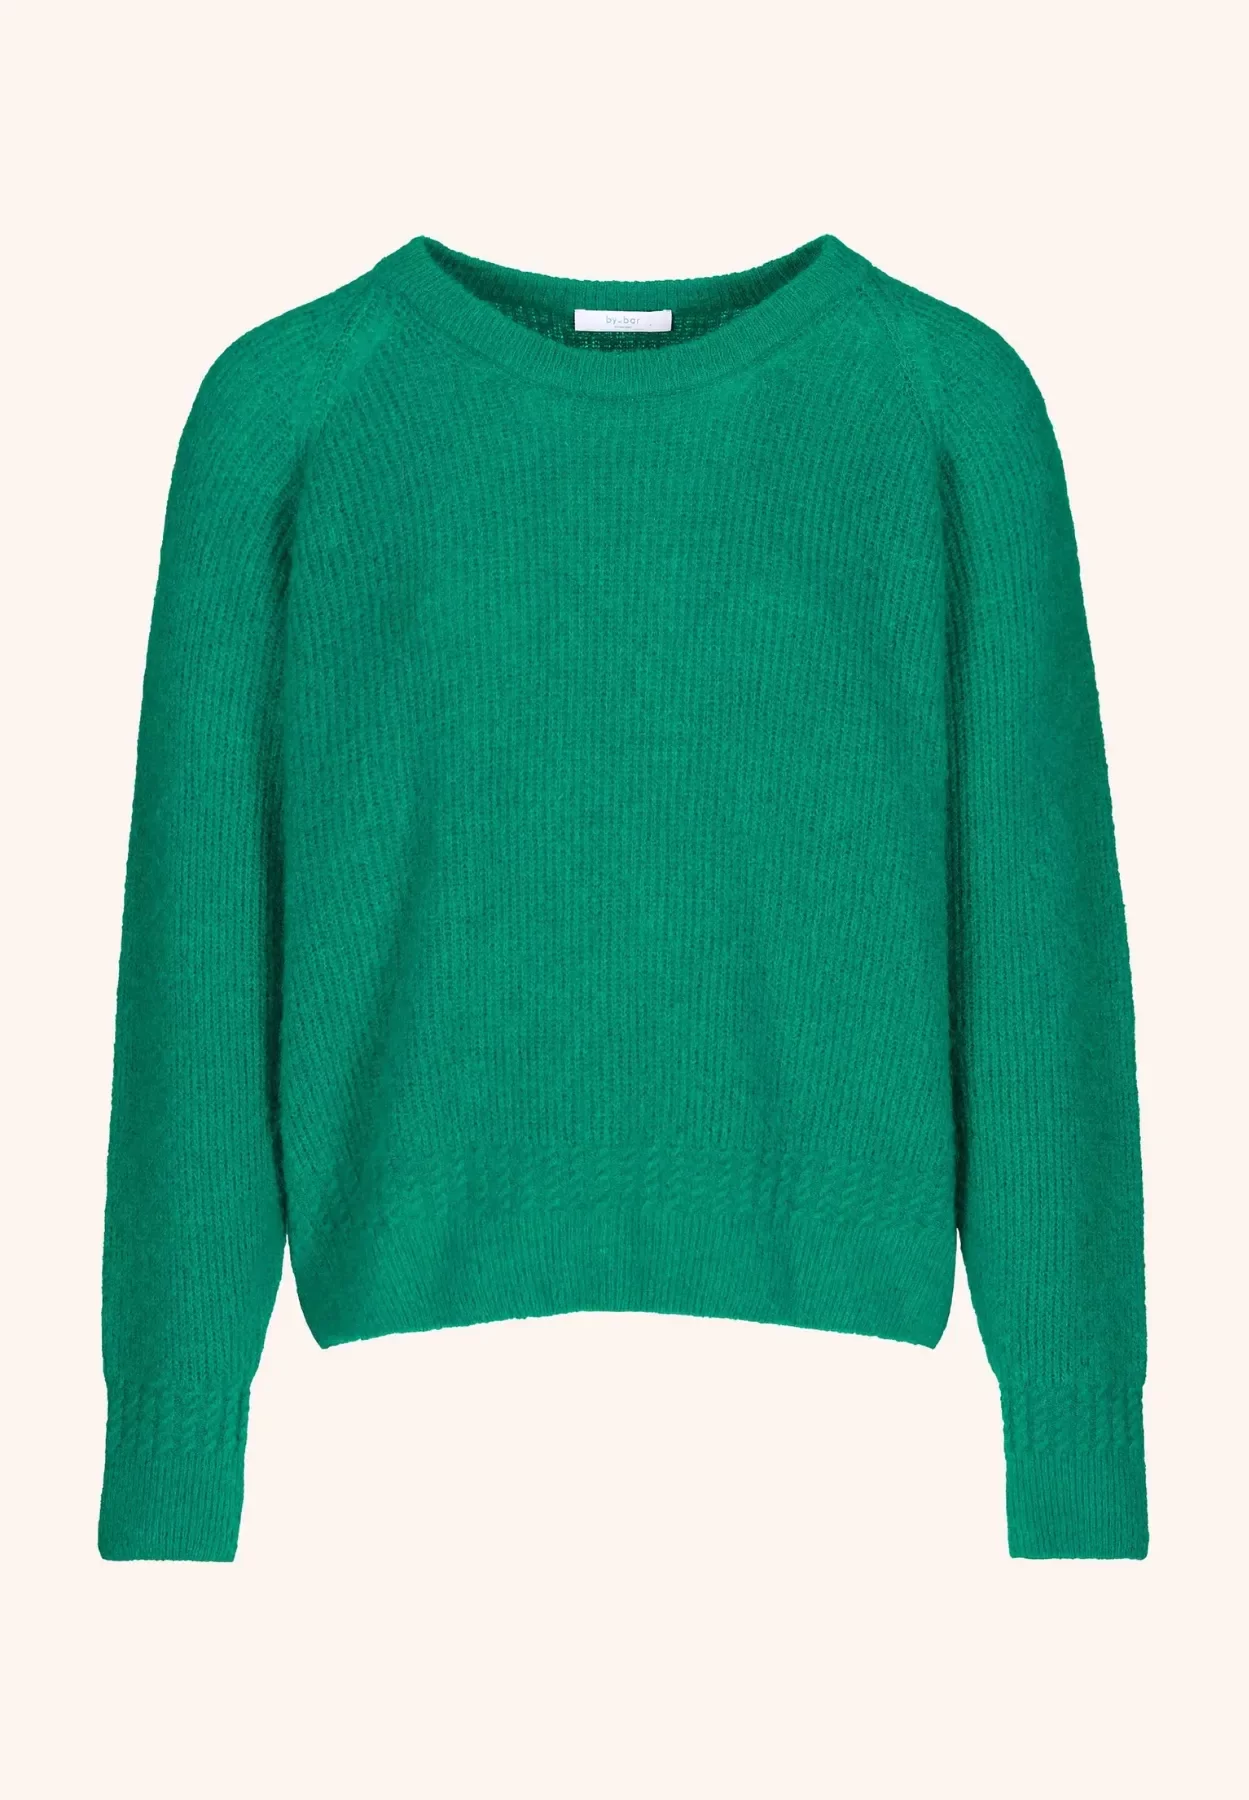 by-bar amsterdam - luca pullover - Evergreen 5